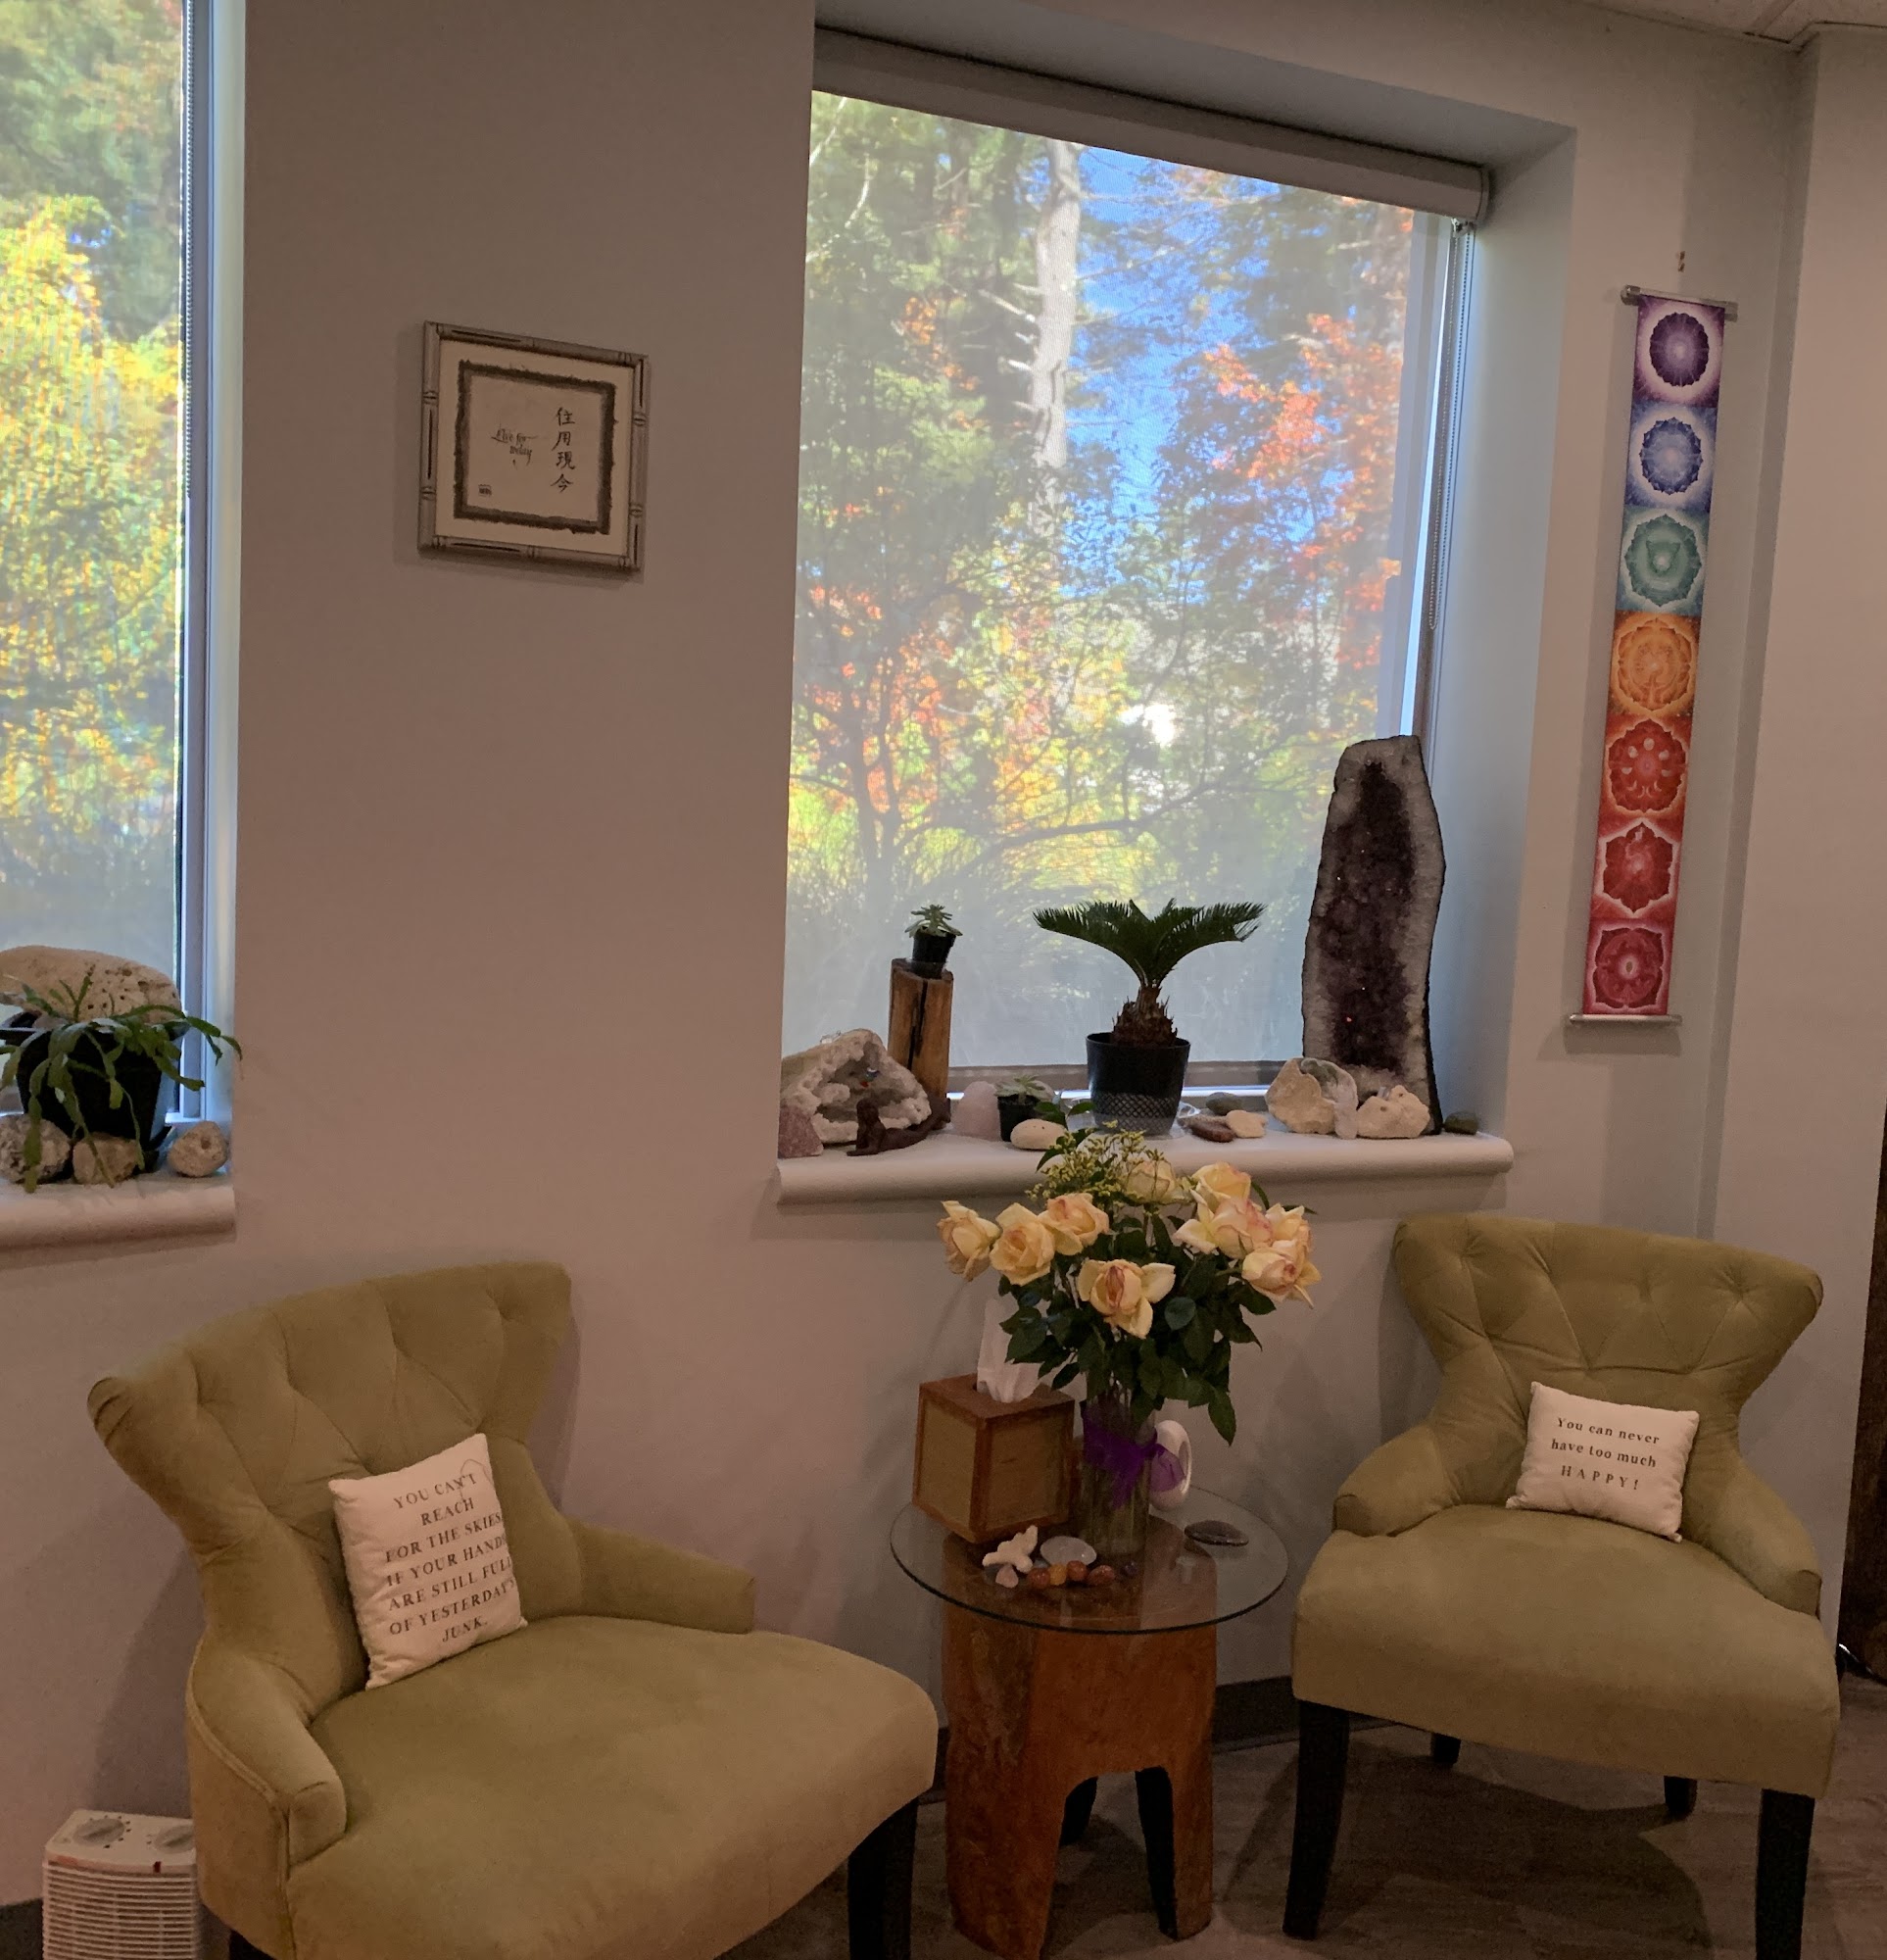 Body n' Beyond Massage Therapy 63 South St Suite 140, Hopkinton Massachusetts 01748